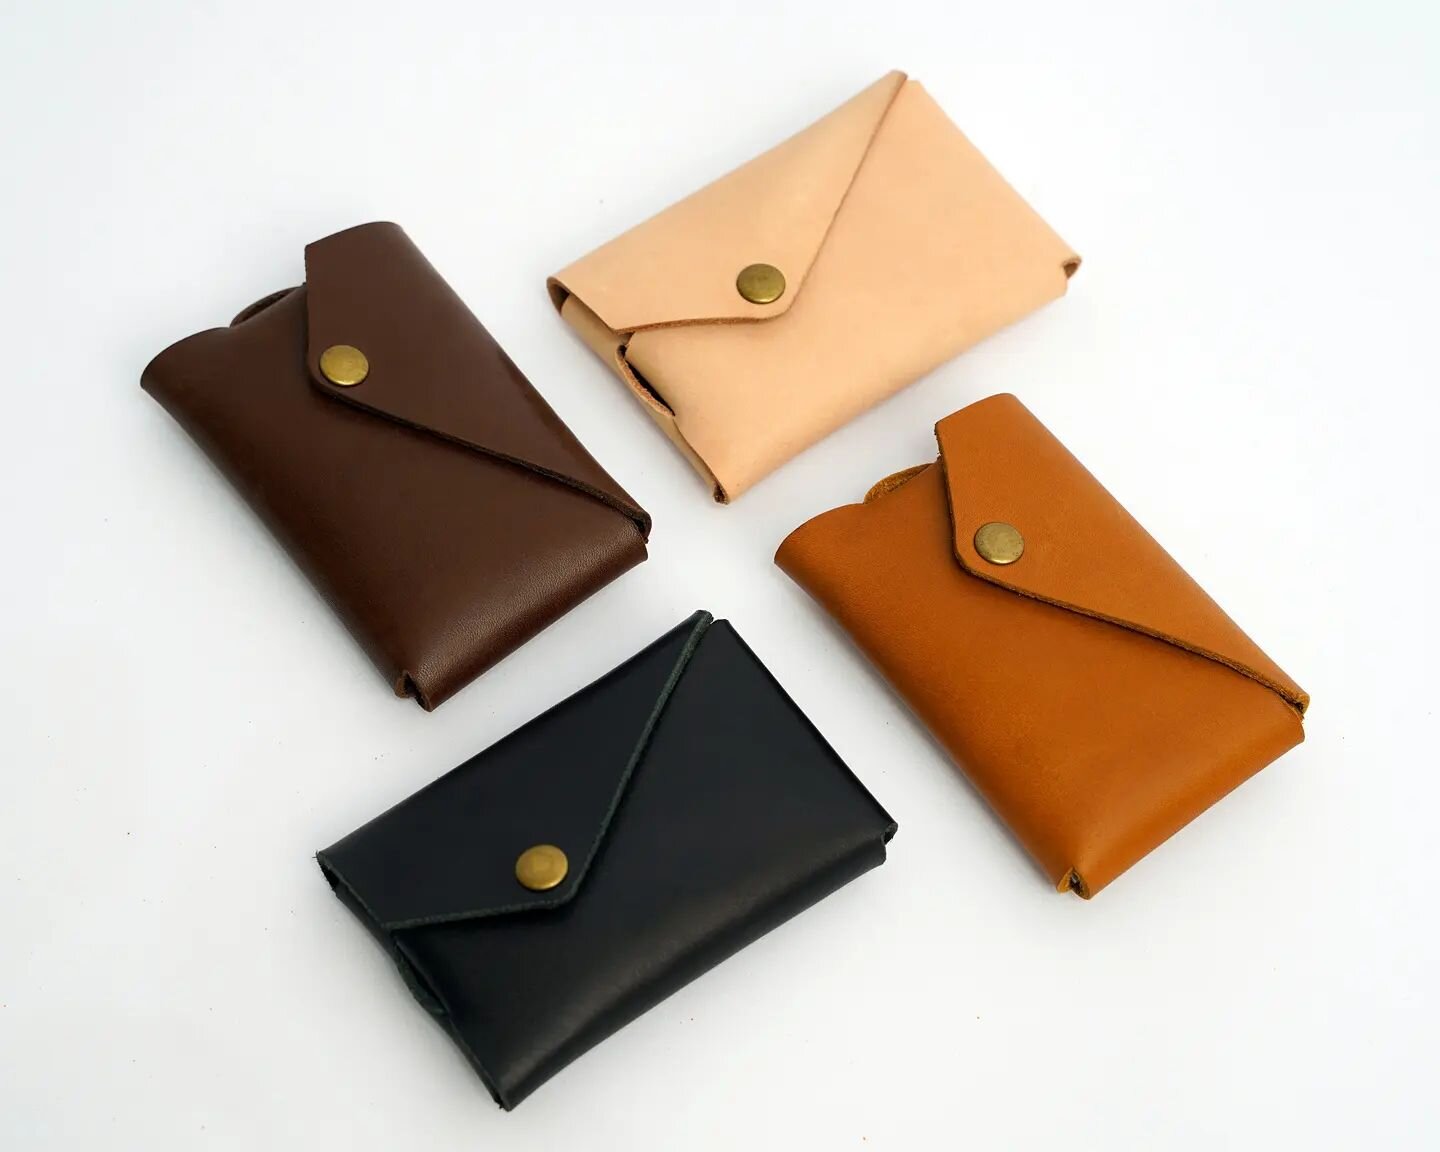 Compact, minimal and secure. This wallet is constructed to last without stiching or glue from a single piece of folded leather. Available in 4 colours.